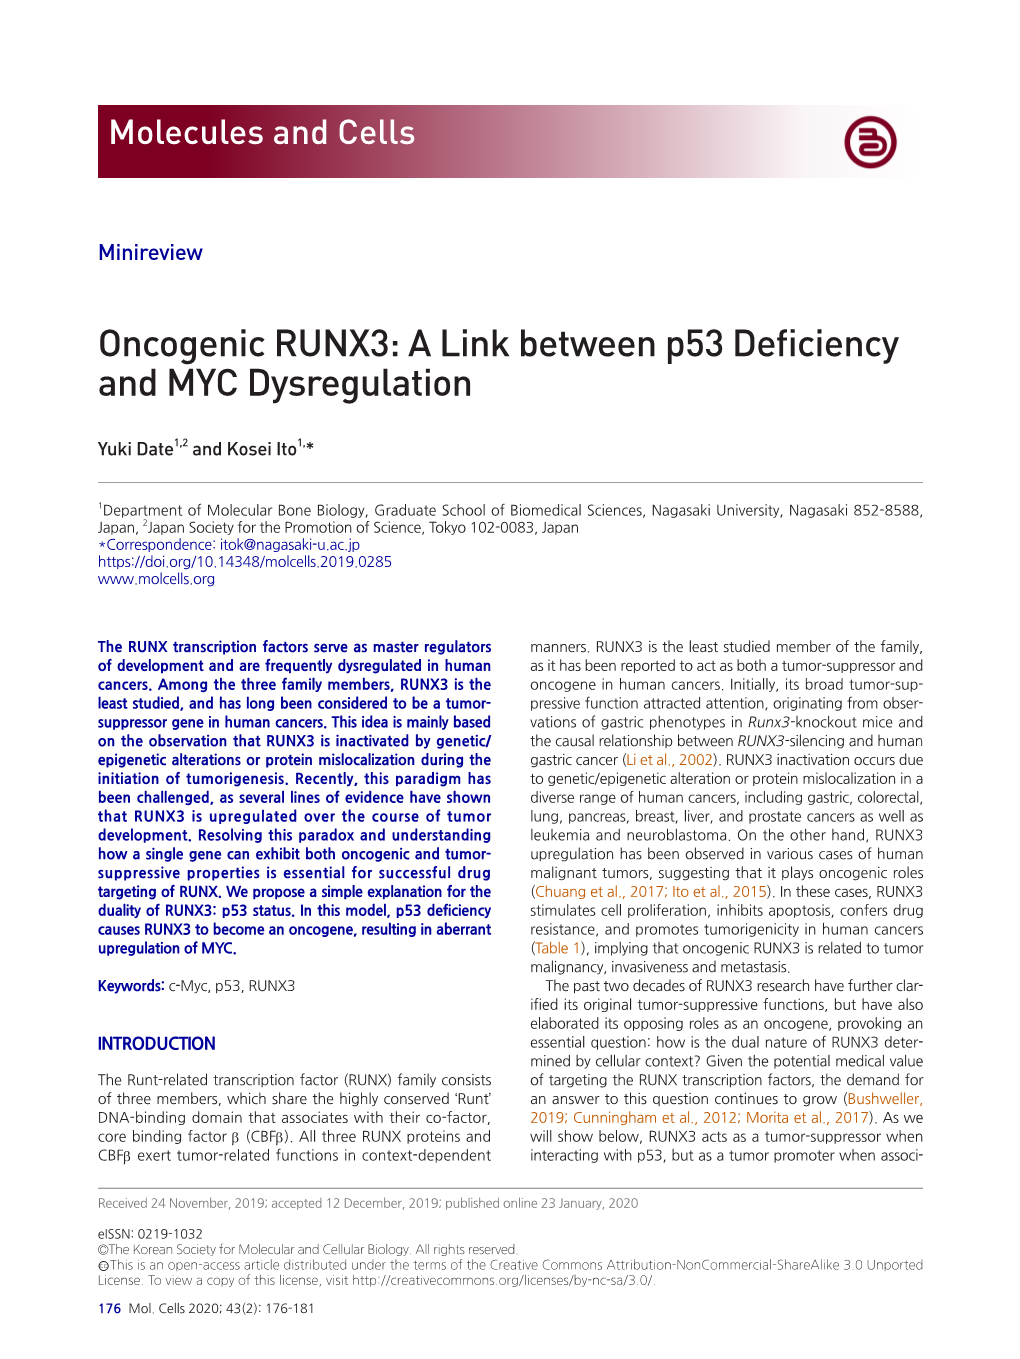 Oncogenic RUNX3: a Link Between P53 Deficiency and MYC Dysregulation